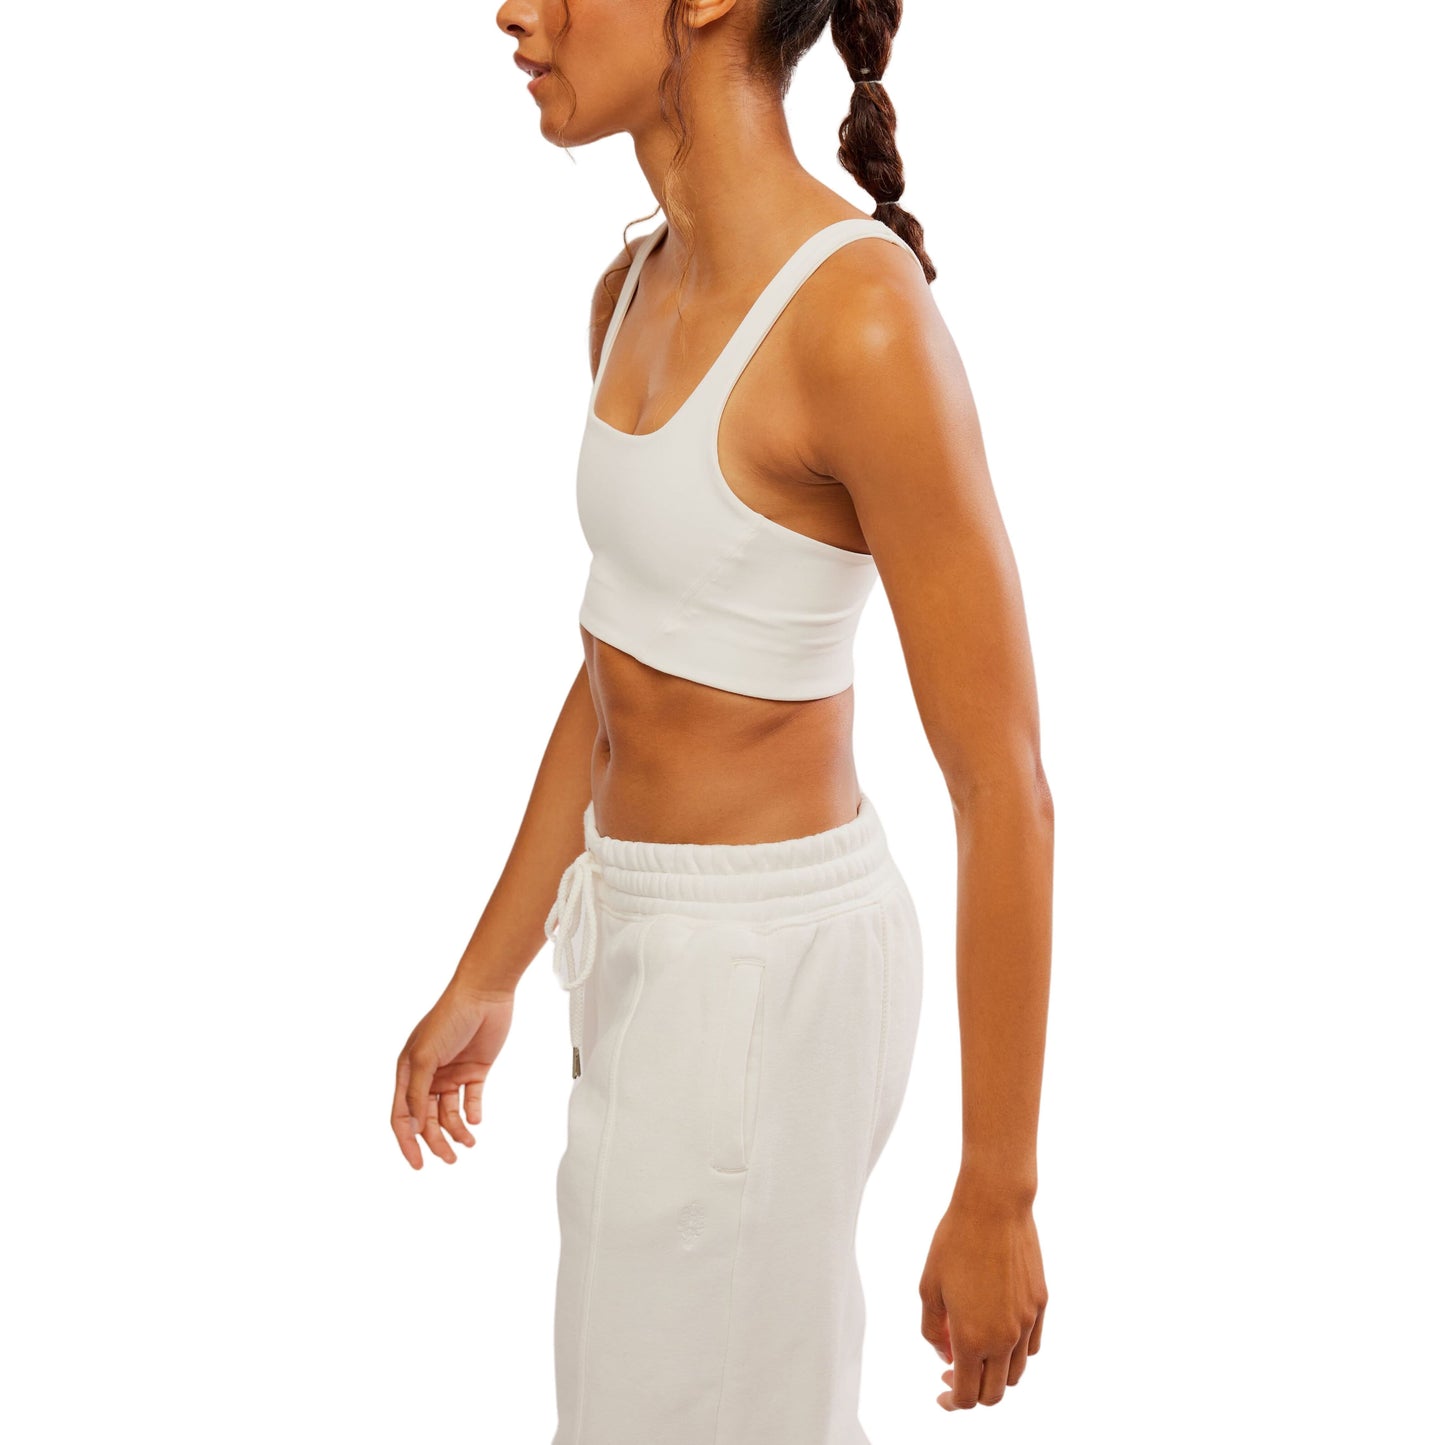 Profile view of a woman wearing a Free People Movement Never Better SQ Neck Bra in White and drawthread pants, isolated on a white background.